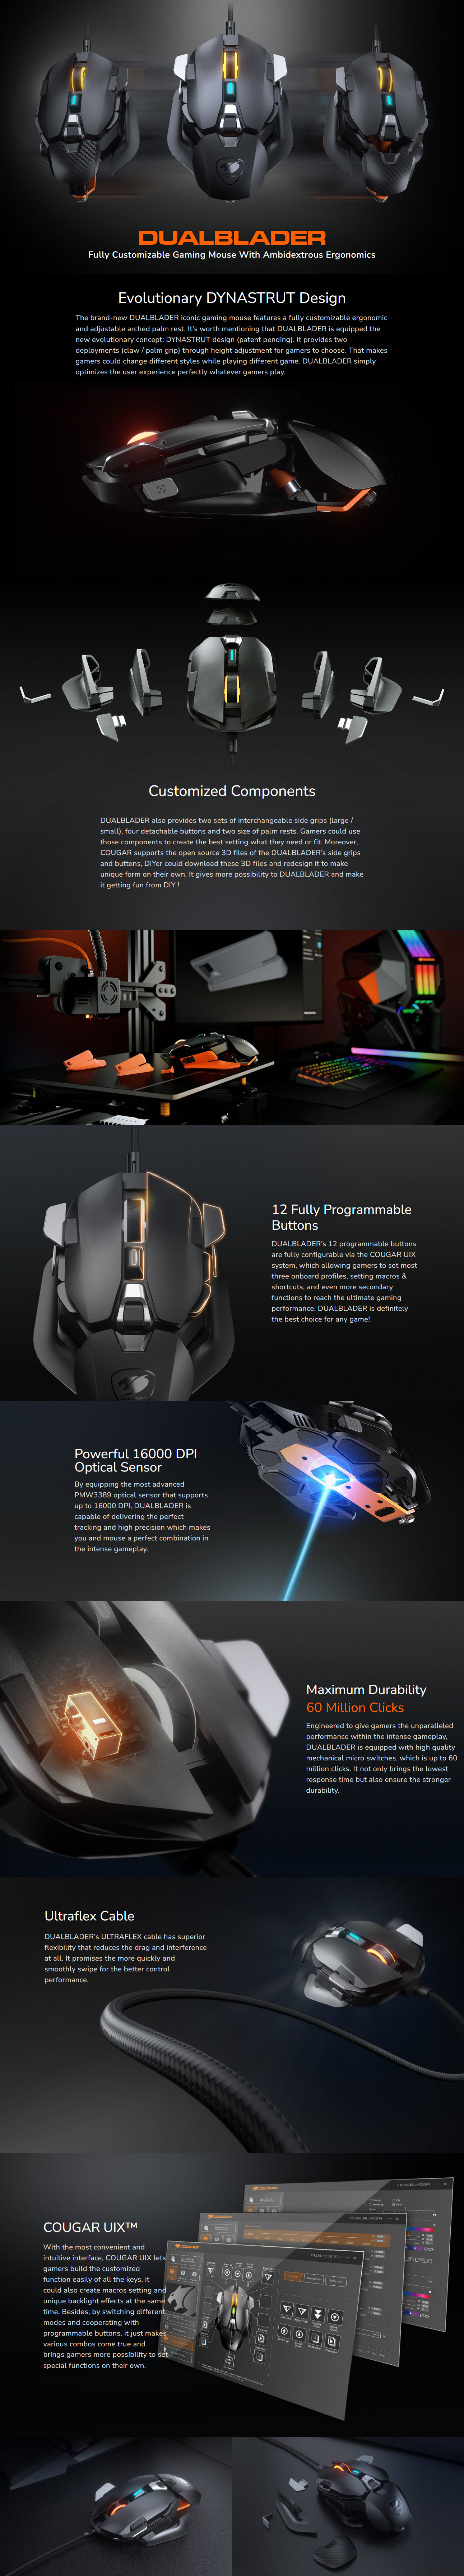 Cougar-Dualblader-Fully-Customisable-Ambidextrous-Gaming-Mouse-1